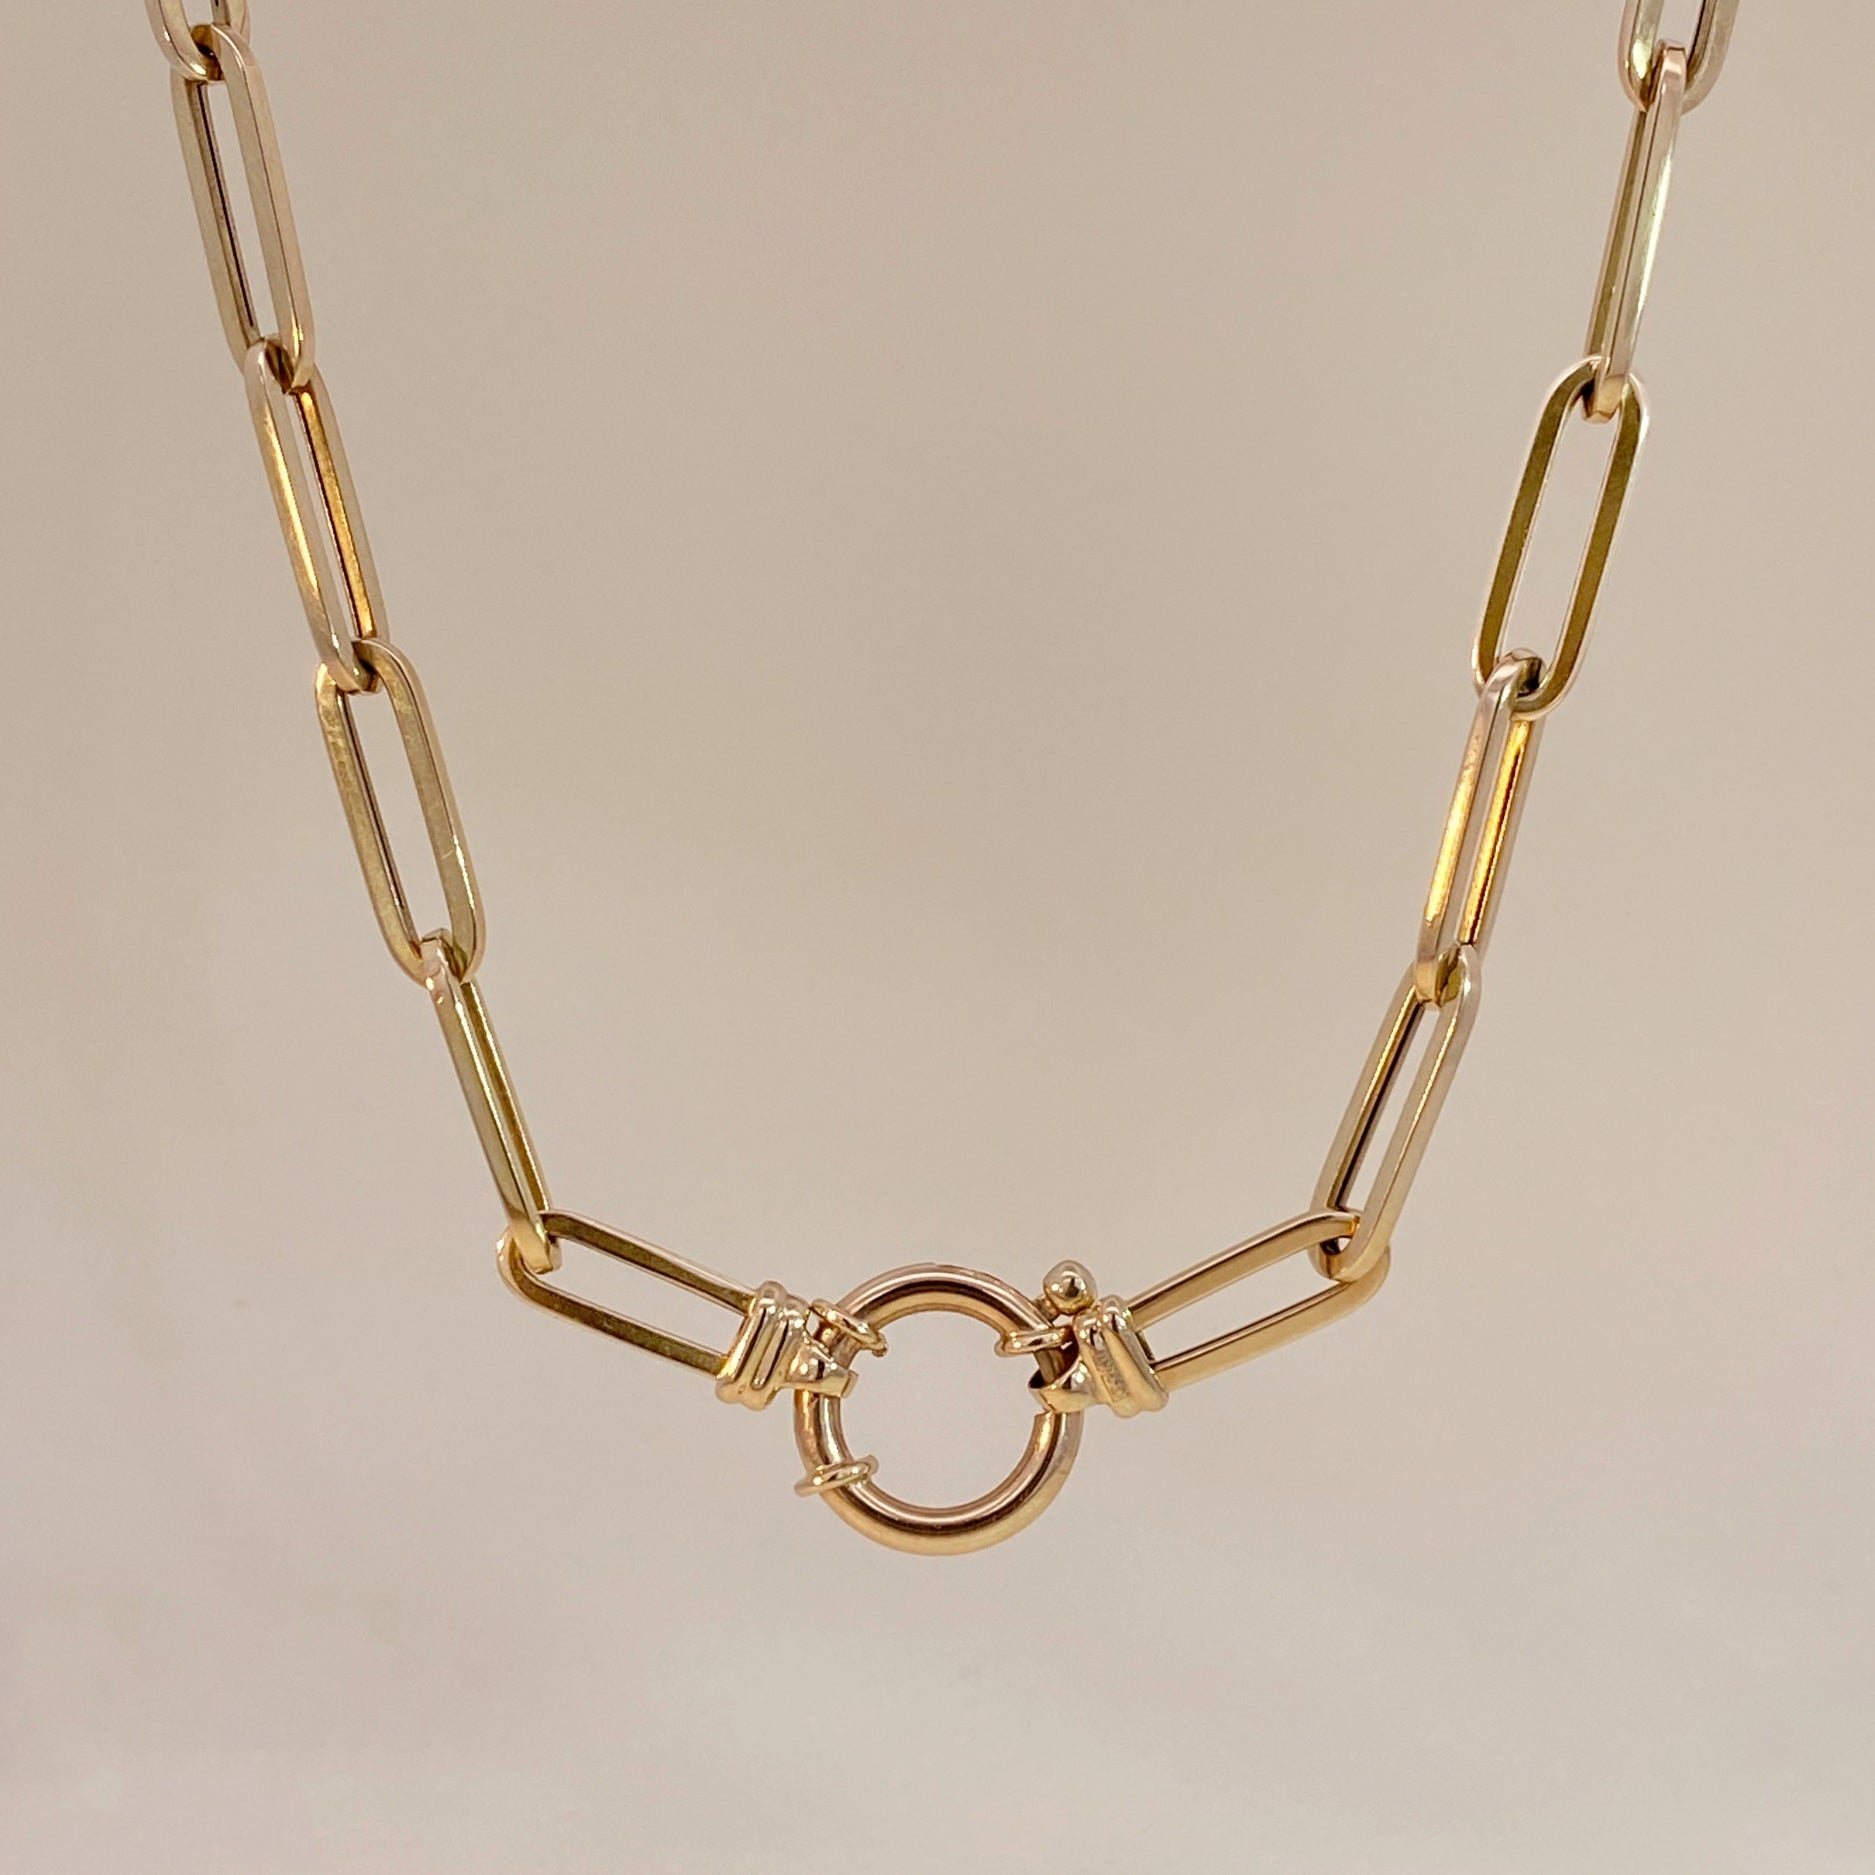 Golden Paperclip Necklace with Springlock